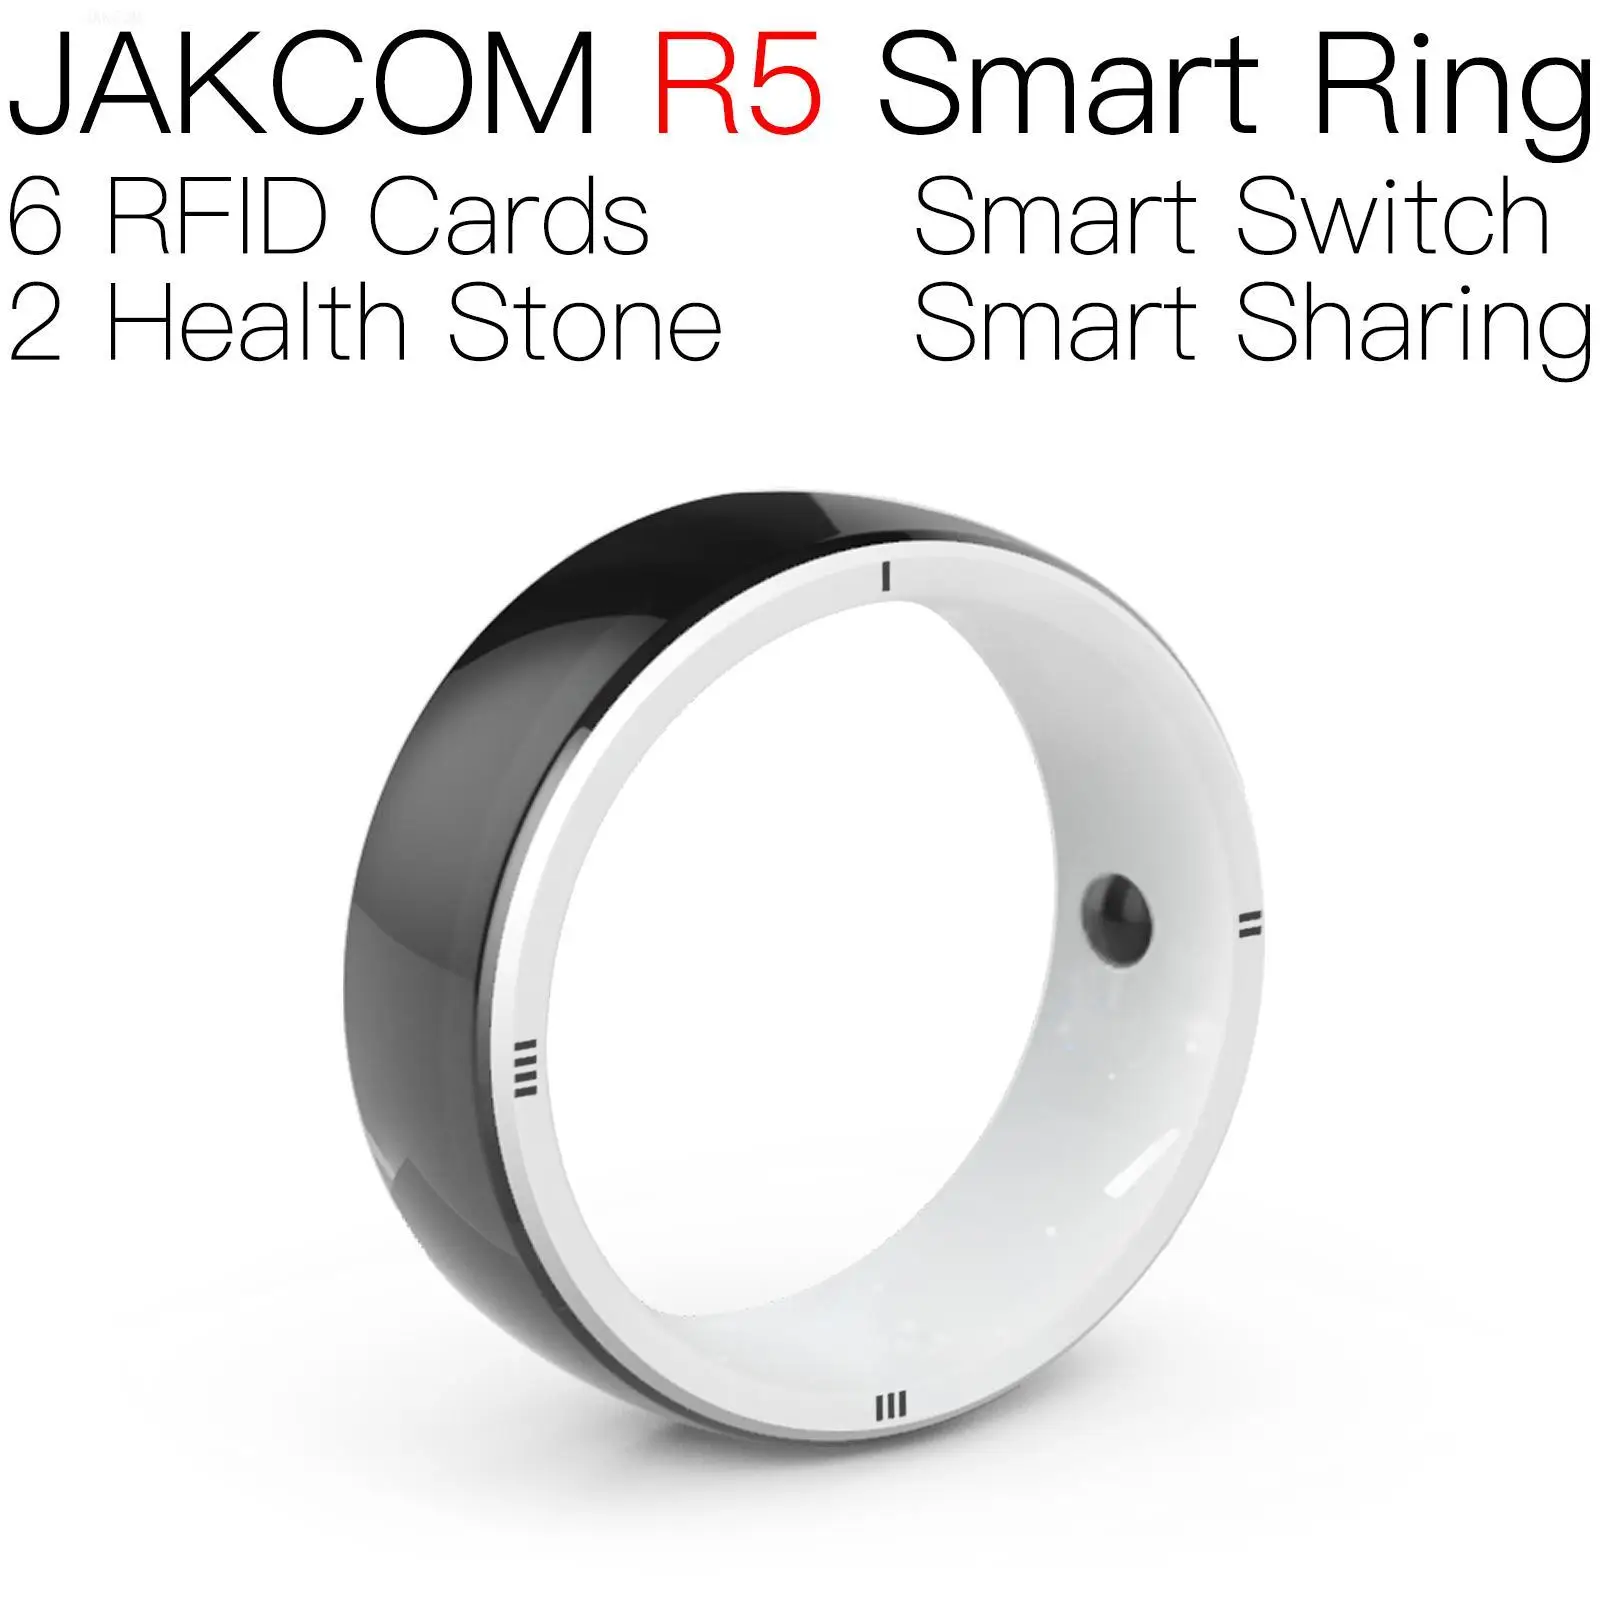 

JAKCOM R5 Smart Ring New arrival as rfid serial number jordan 4 shoes for 1 s70 uid long range card active jewelry tag